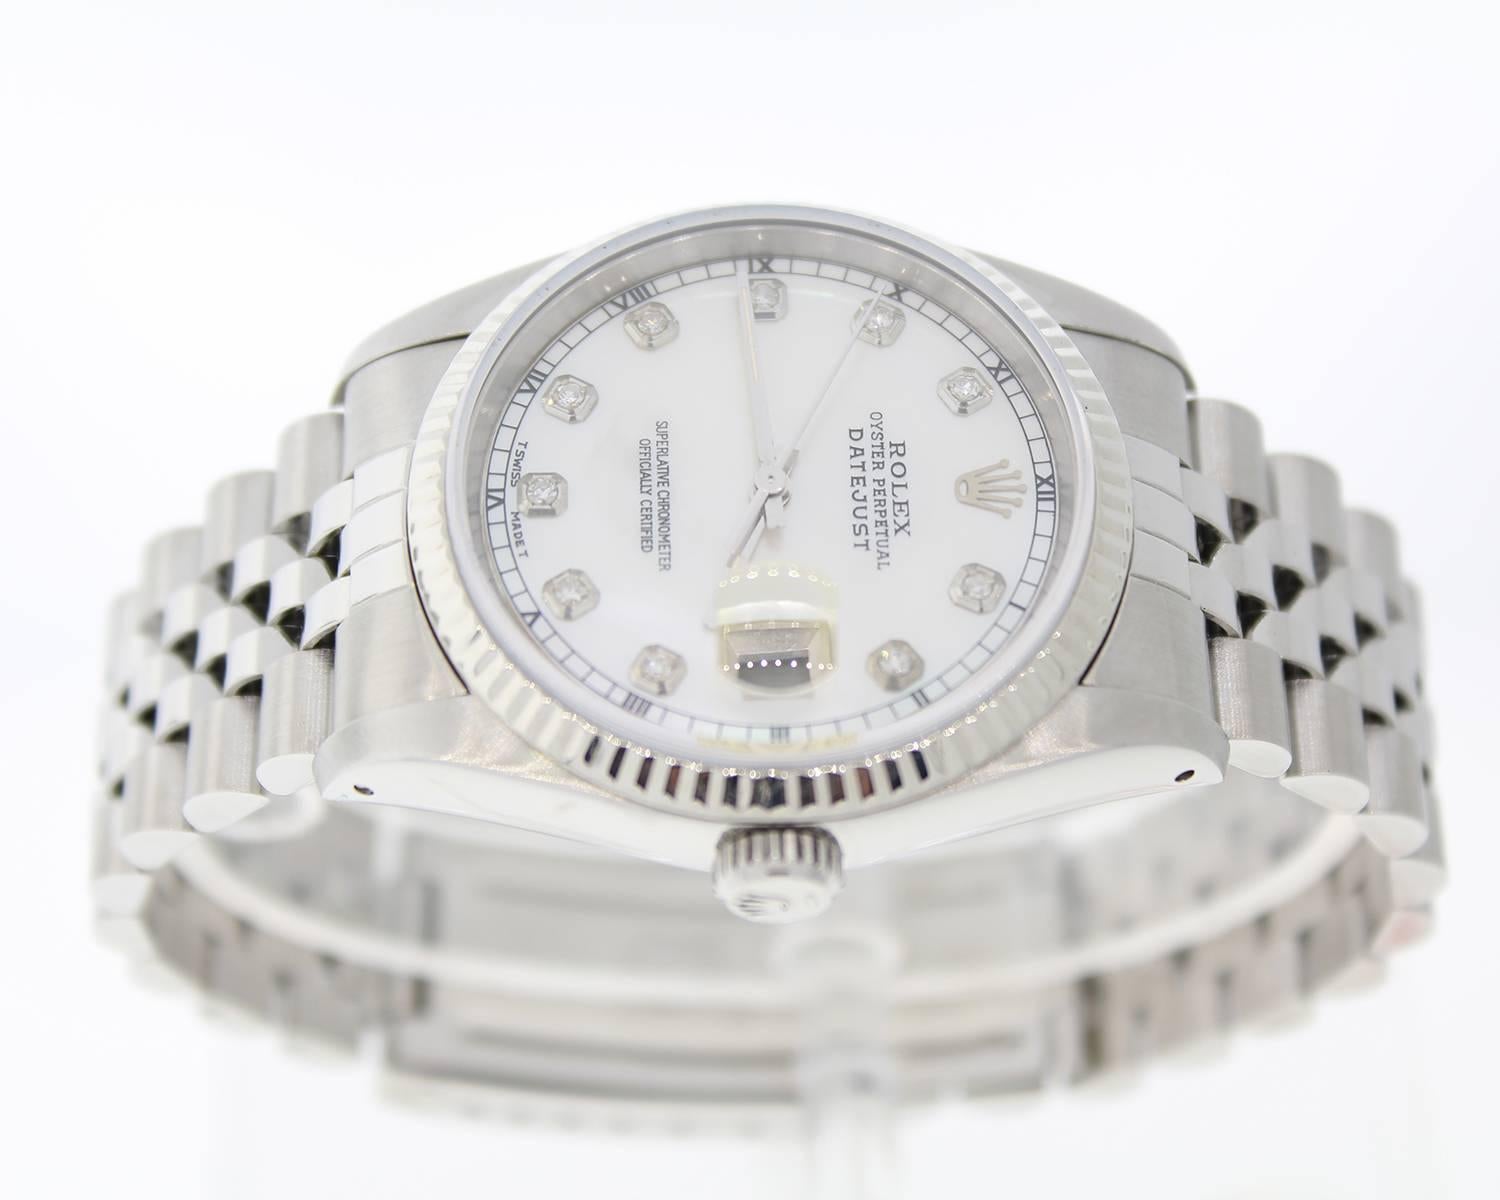 Brand Name: Rolex
Style Number: 30737
Style Name: Datejust
Color Name (Dial): Custom MOP Diamond Dial
Country of Manufacture: Switzerland
Gender: Unisex
Strap Material: Stainless Steel
Case Metal: Stainless Steel
Movement Type: